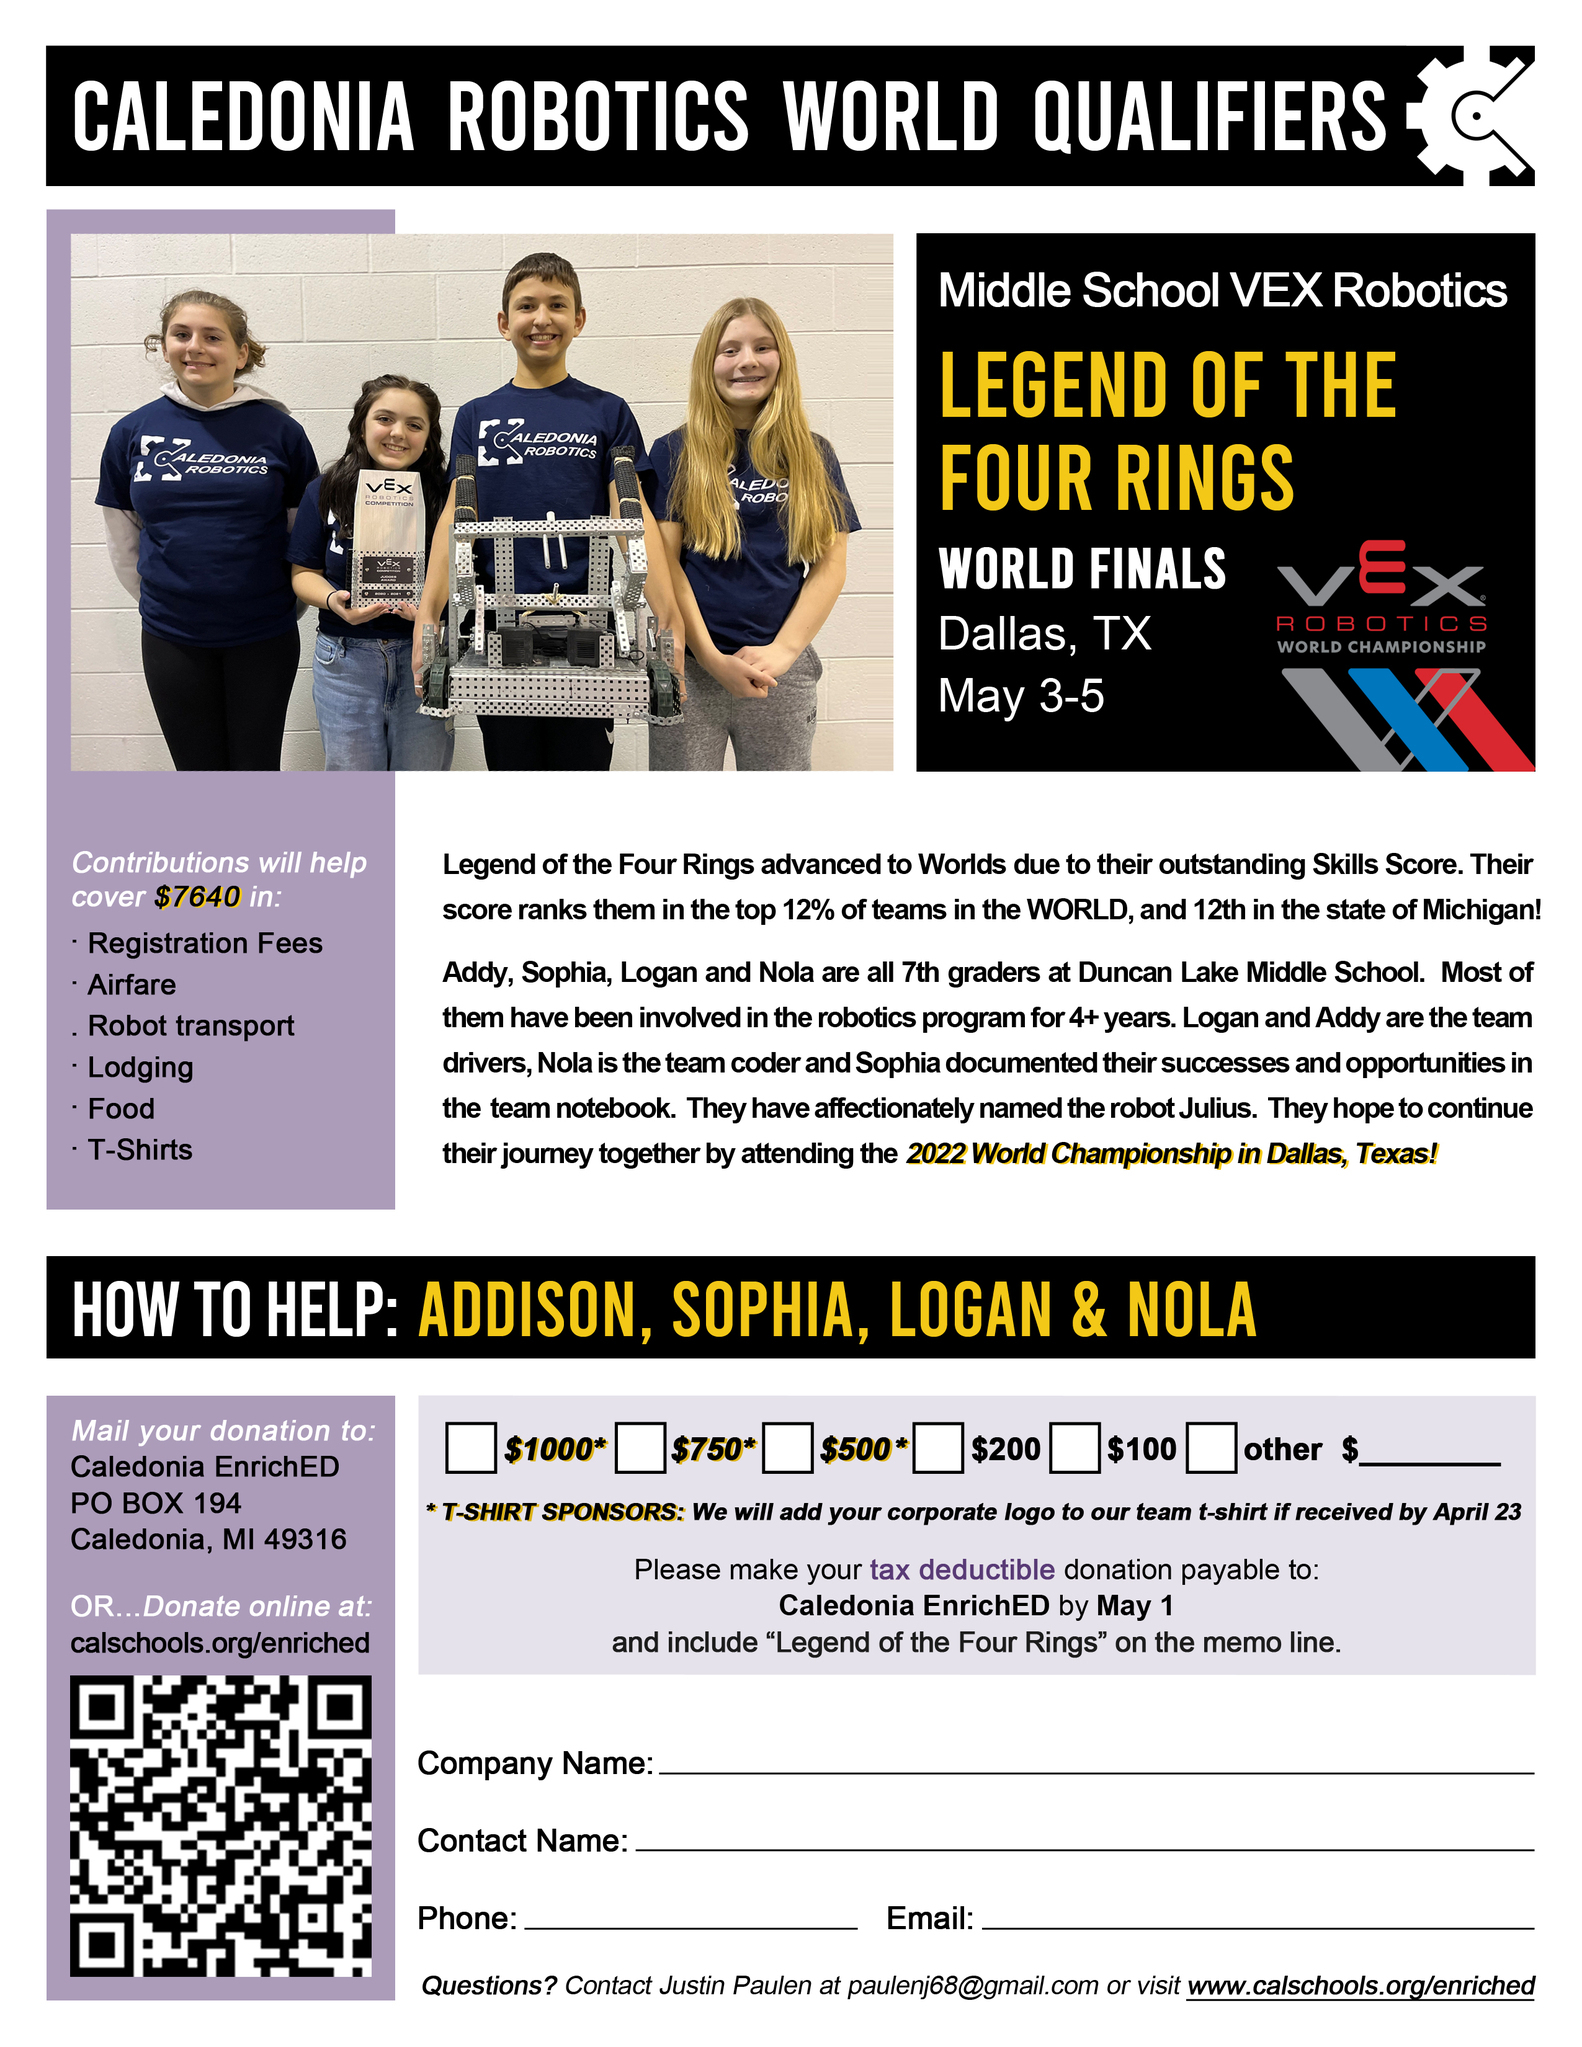 Team Letter_Legend of the Four Rings